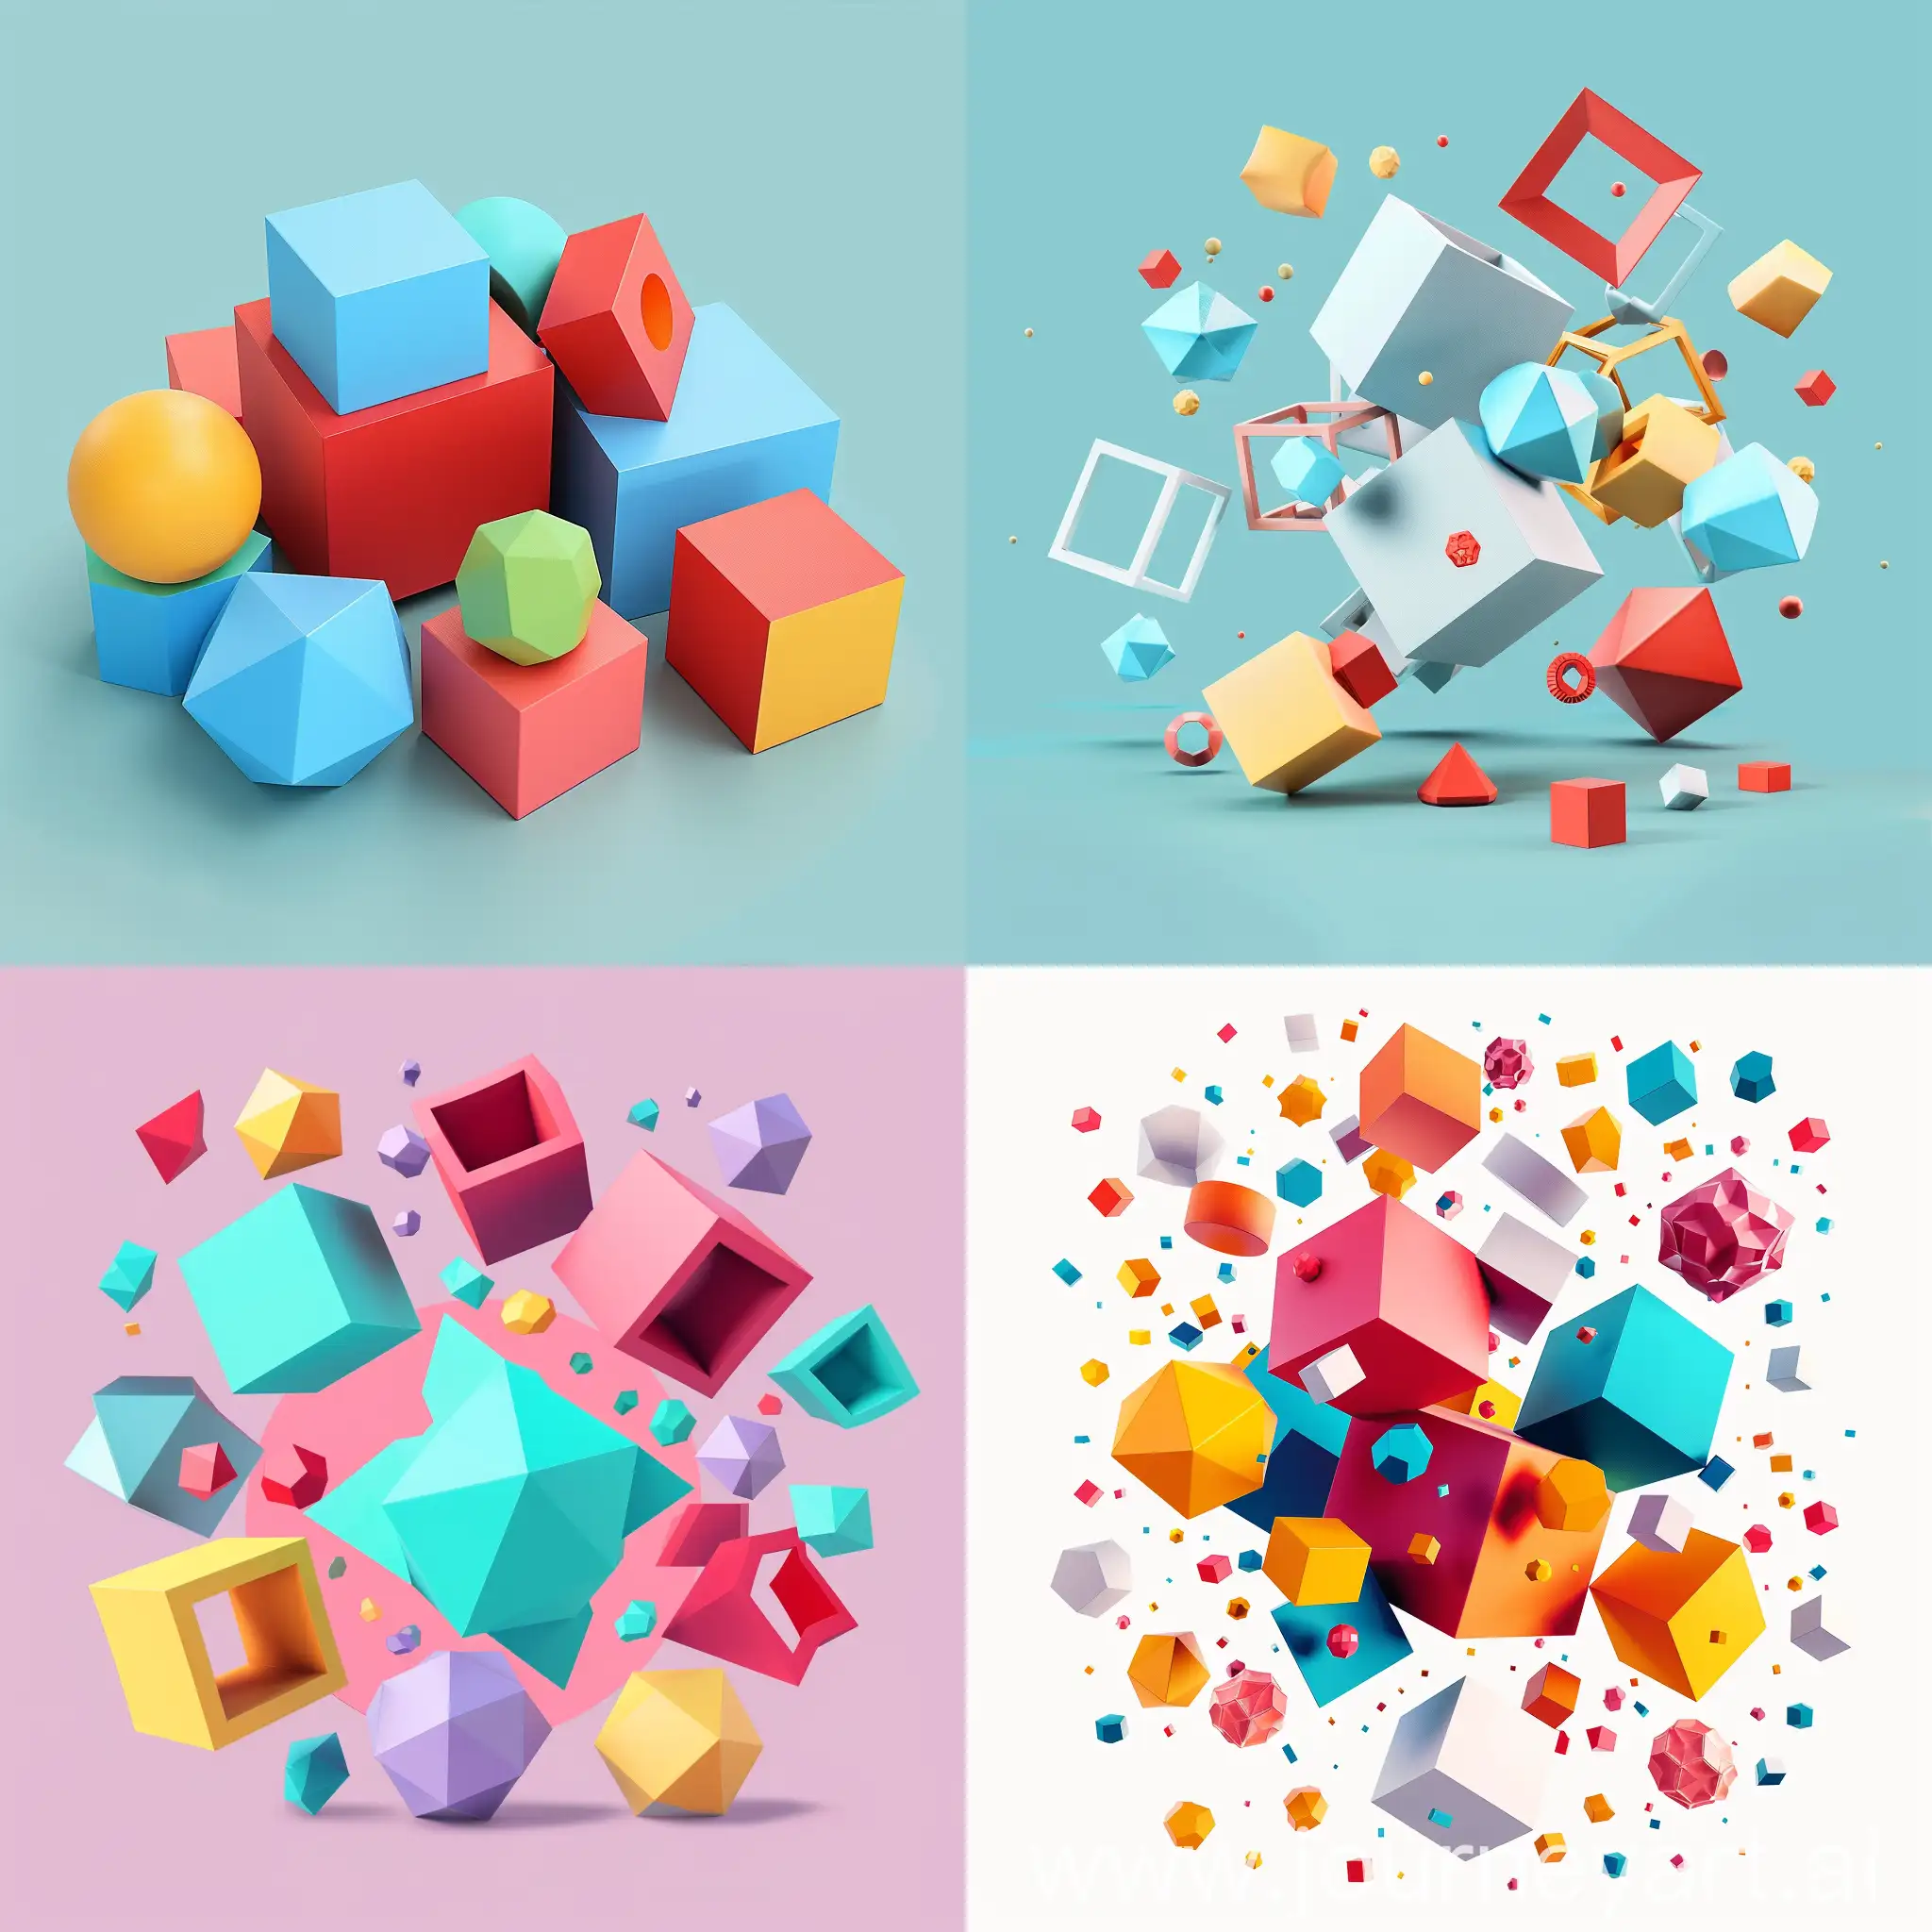 Colorful-Geometric-3D-Shapes-Educational-Toy-for-Kids